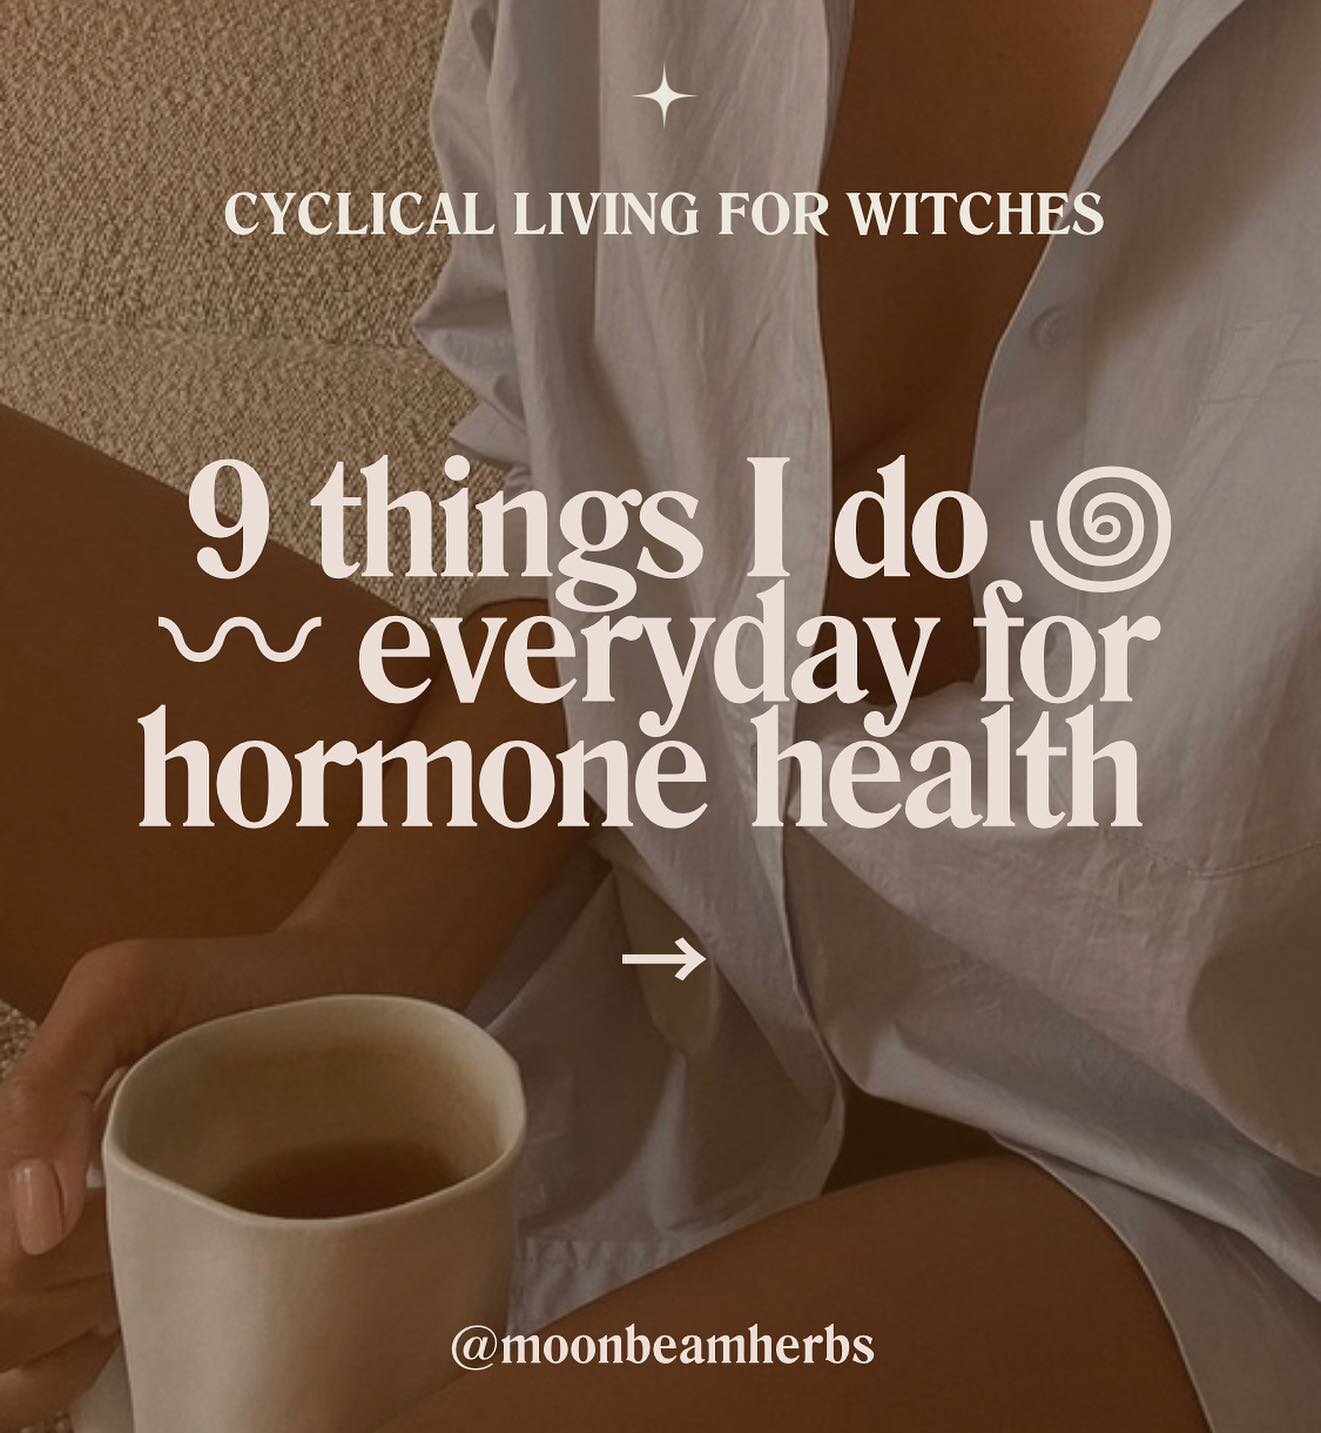 9 things I do everyday for hormone health 🔮

Our cycles, hormones &amp; reproductive health are key to our physical, emotional &amp; spiritual wellbeing ✨

If they&rsquo;re out of balance? It can have a huge influence on pretty much everything else 